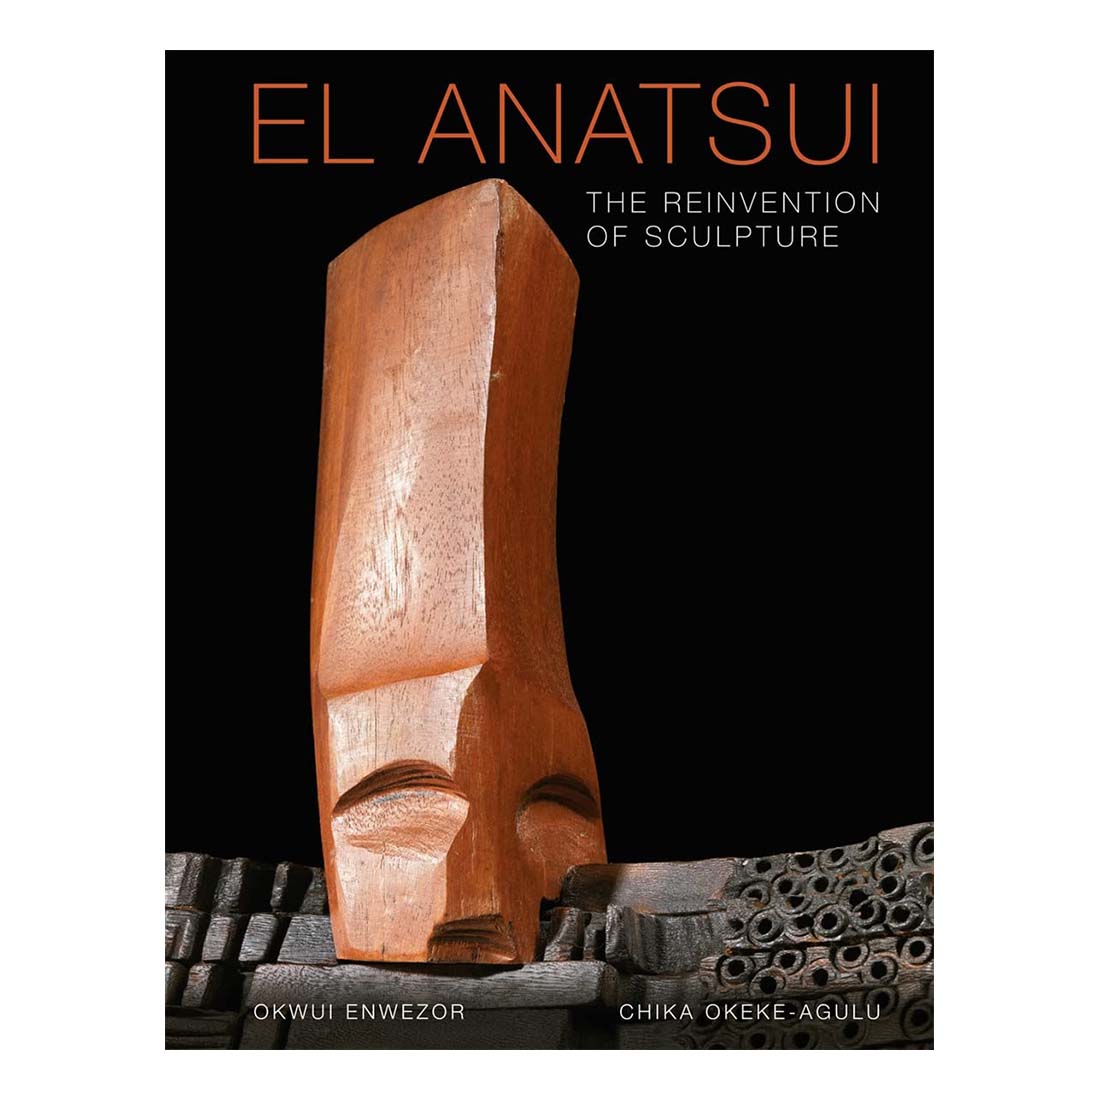 El Anatsui: The Reinvention of Sculpture